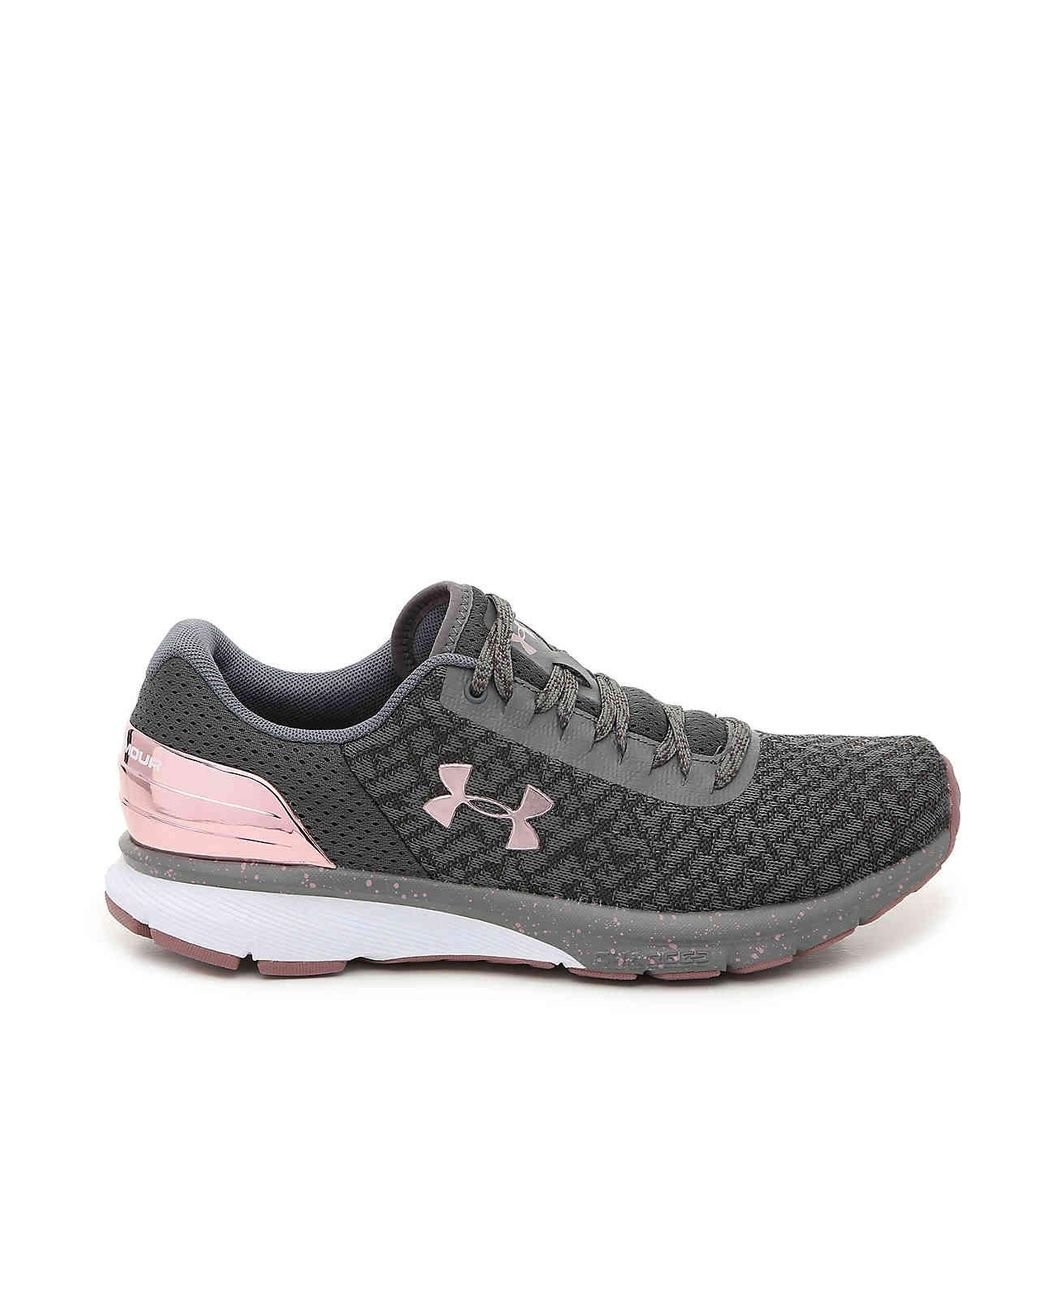 Under Armour Synthetic Charged Escape 2 Running Shoe in Grey/Rose Gold  Metallic (Gray) | Lyst